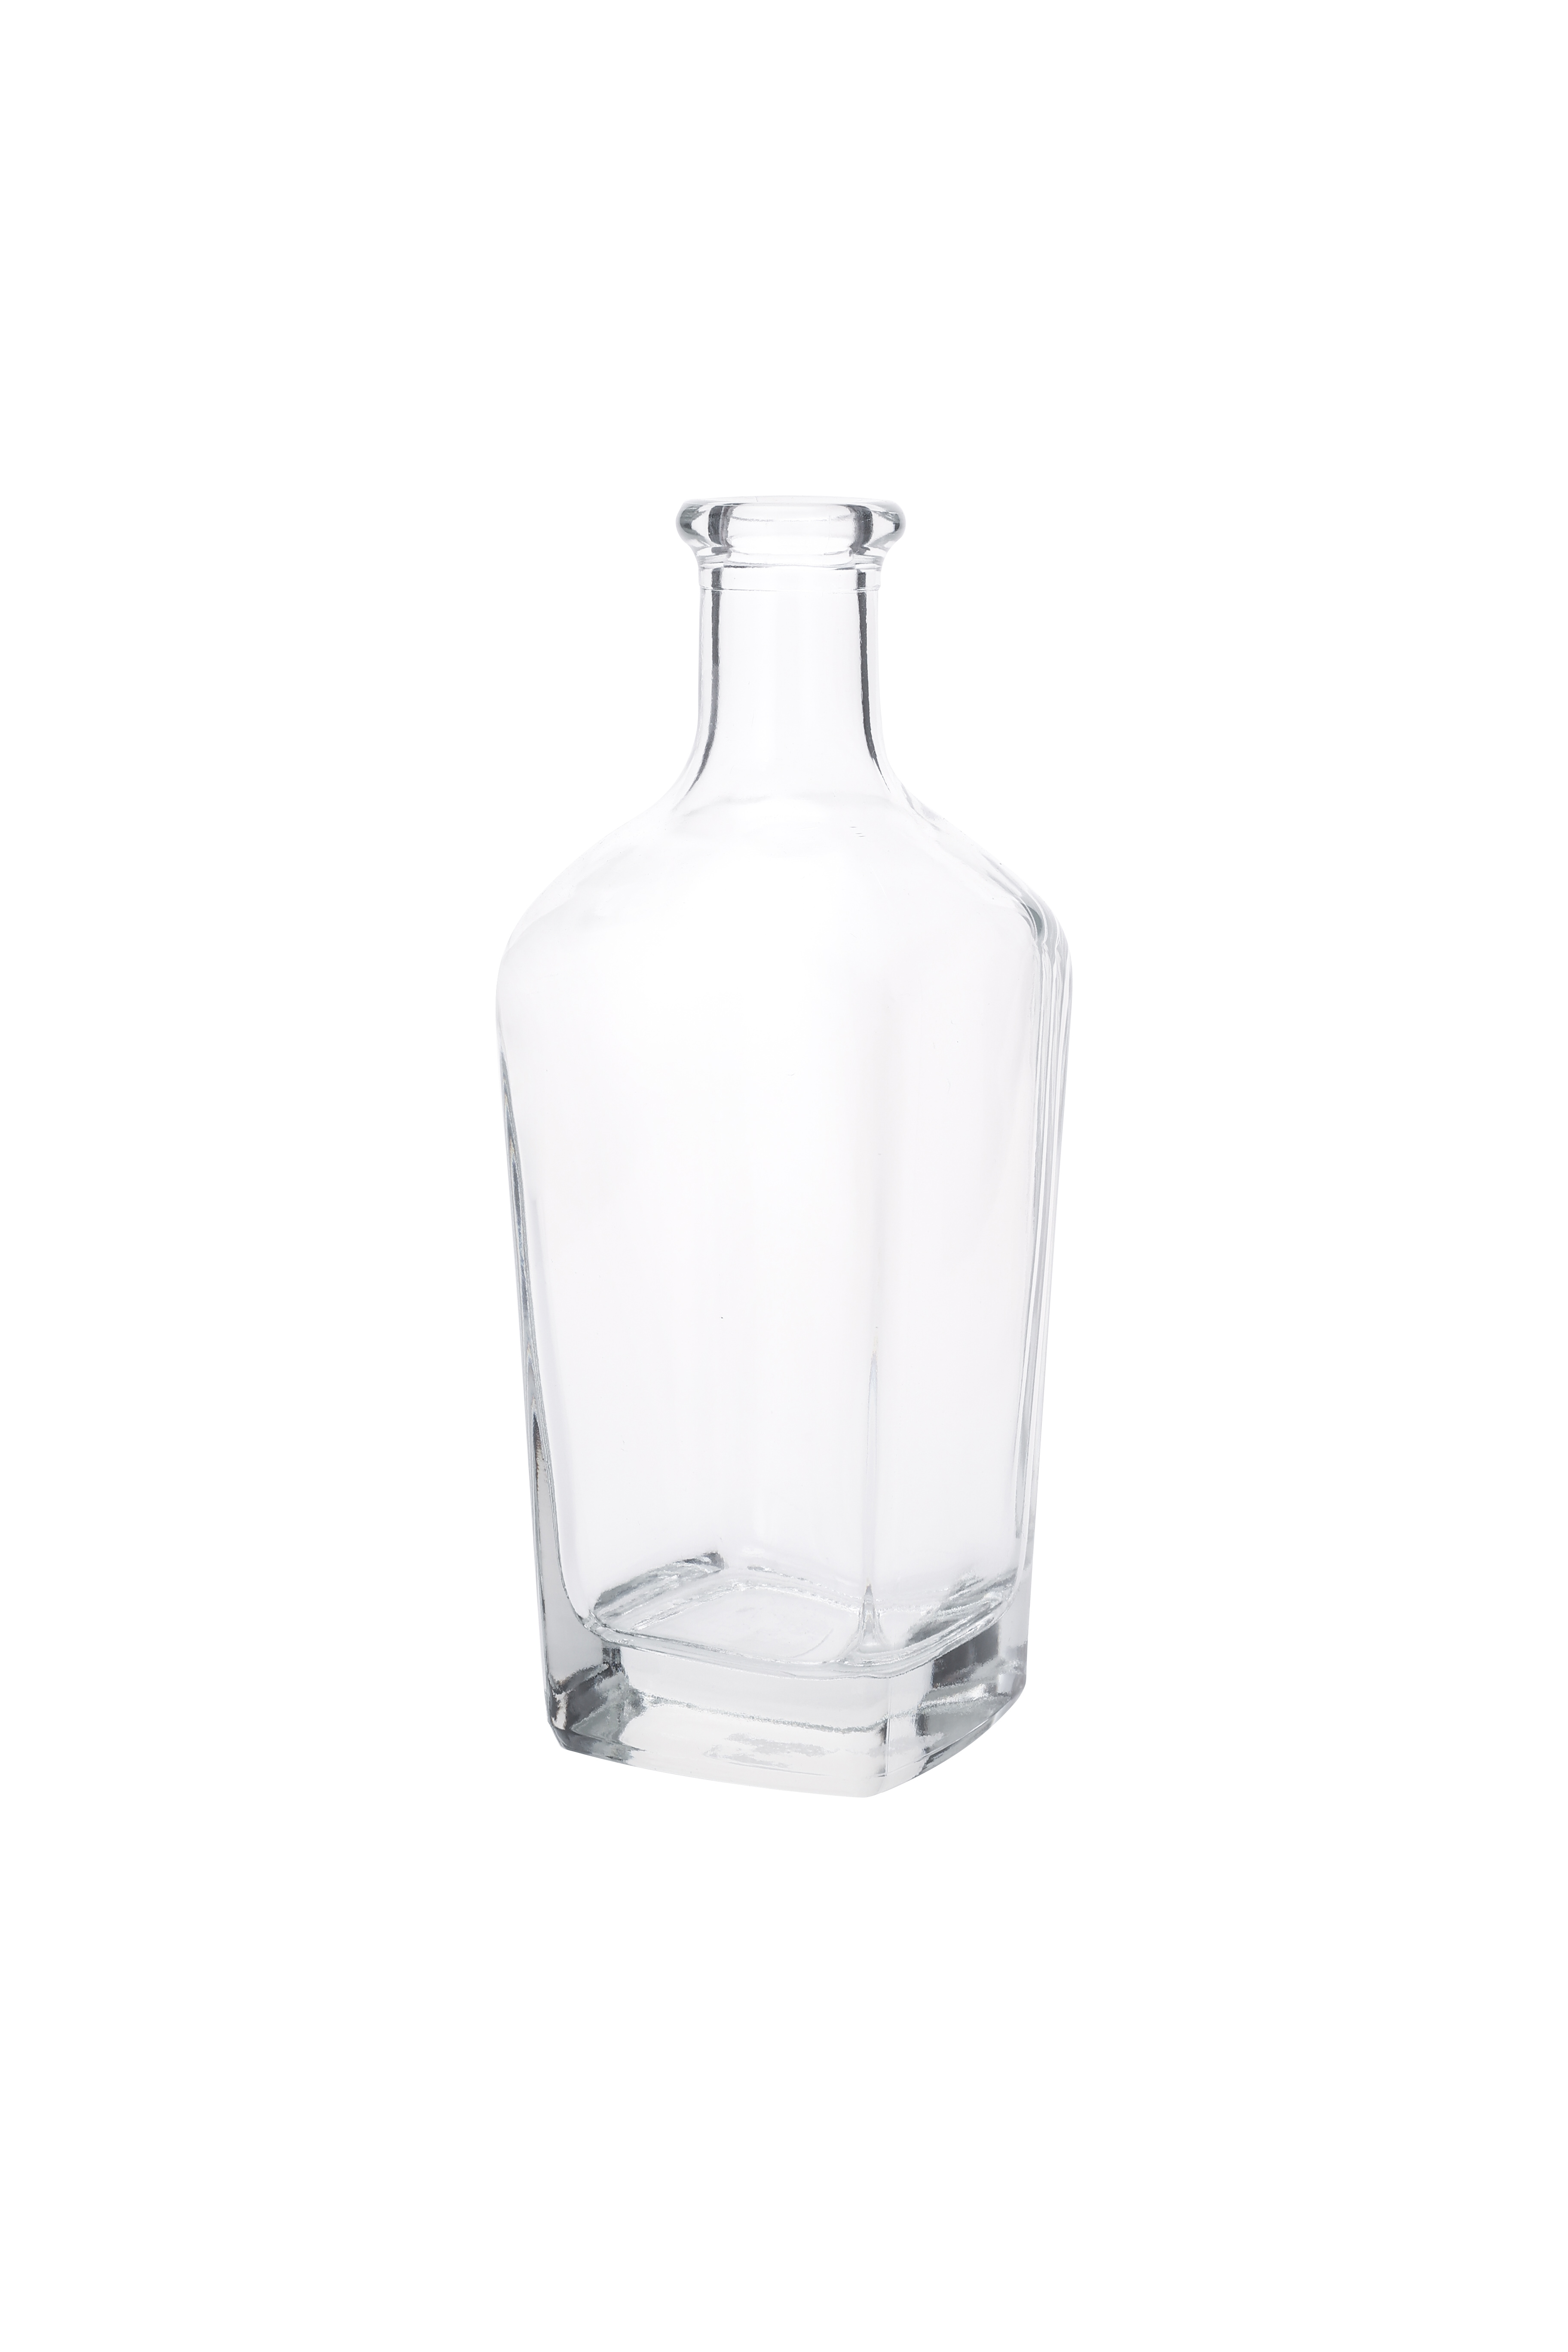  Glass Bottle with Cap for Drinking